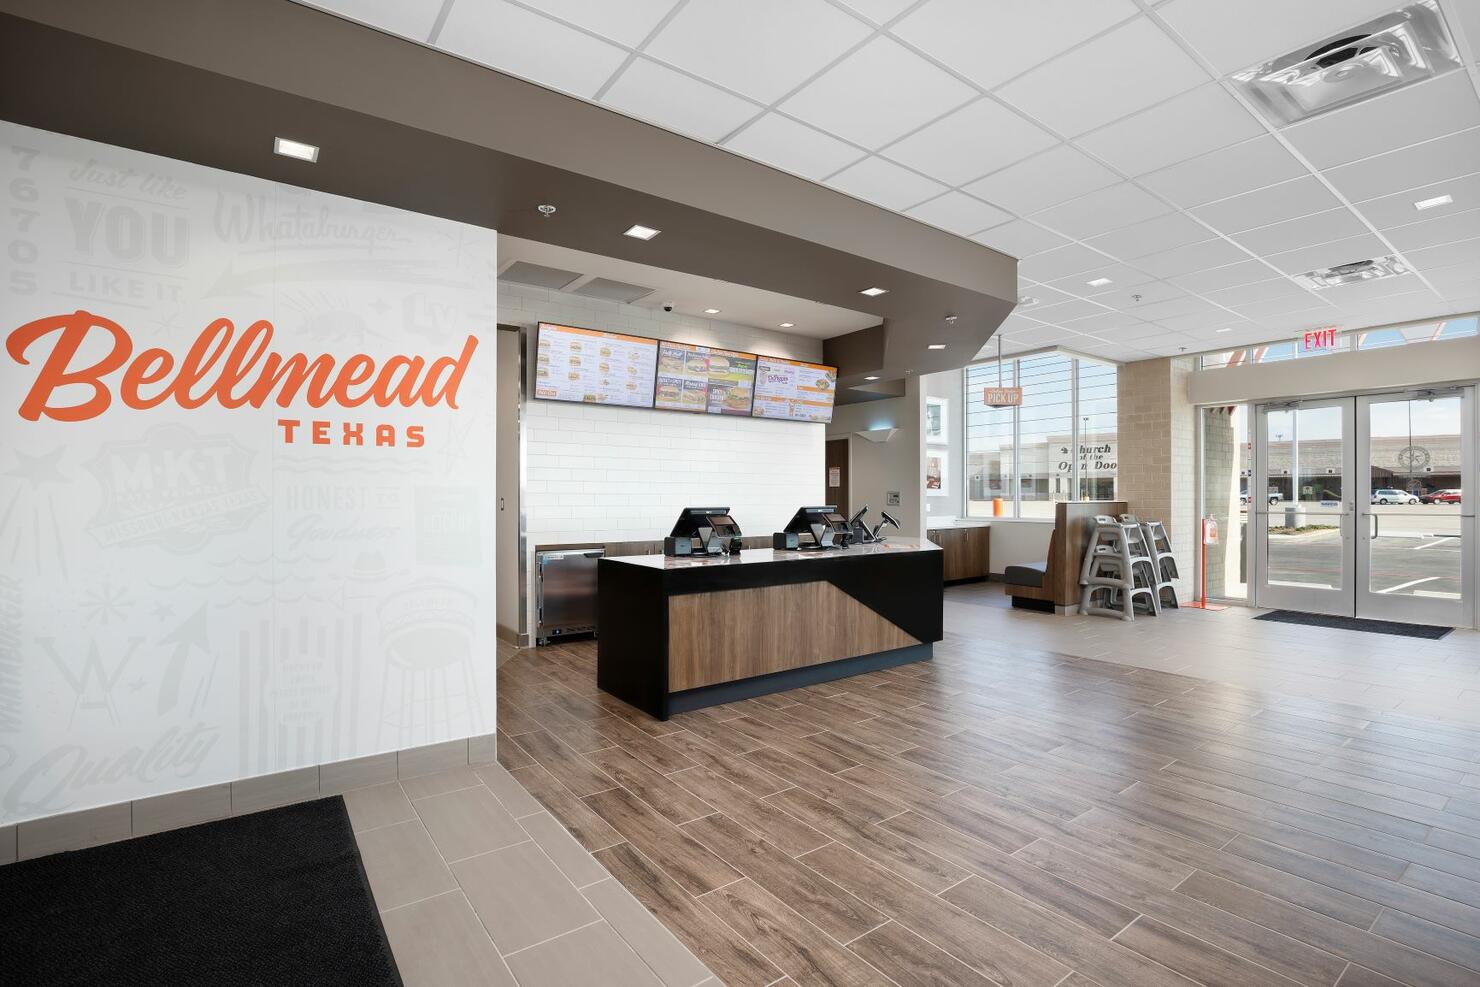 The redesigned Whataburger in Bellmead, Texas. 